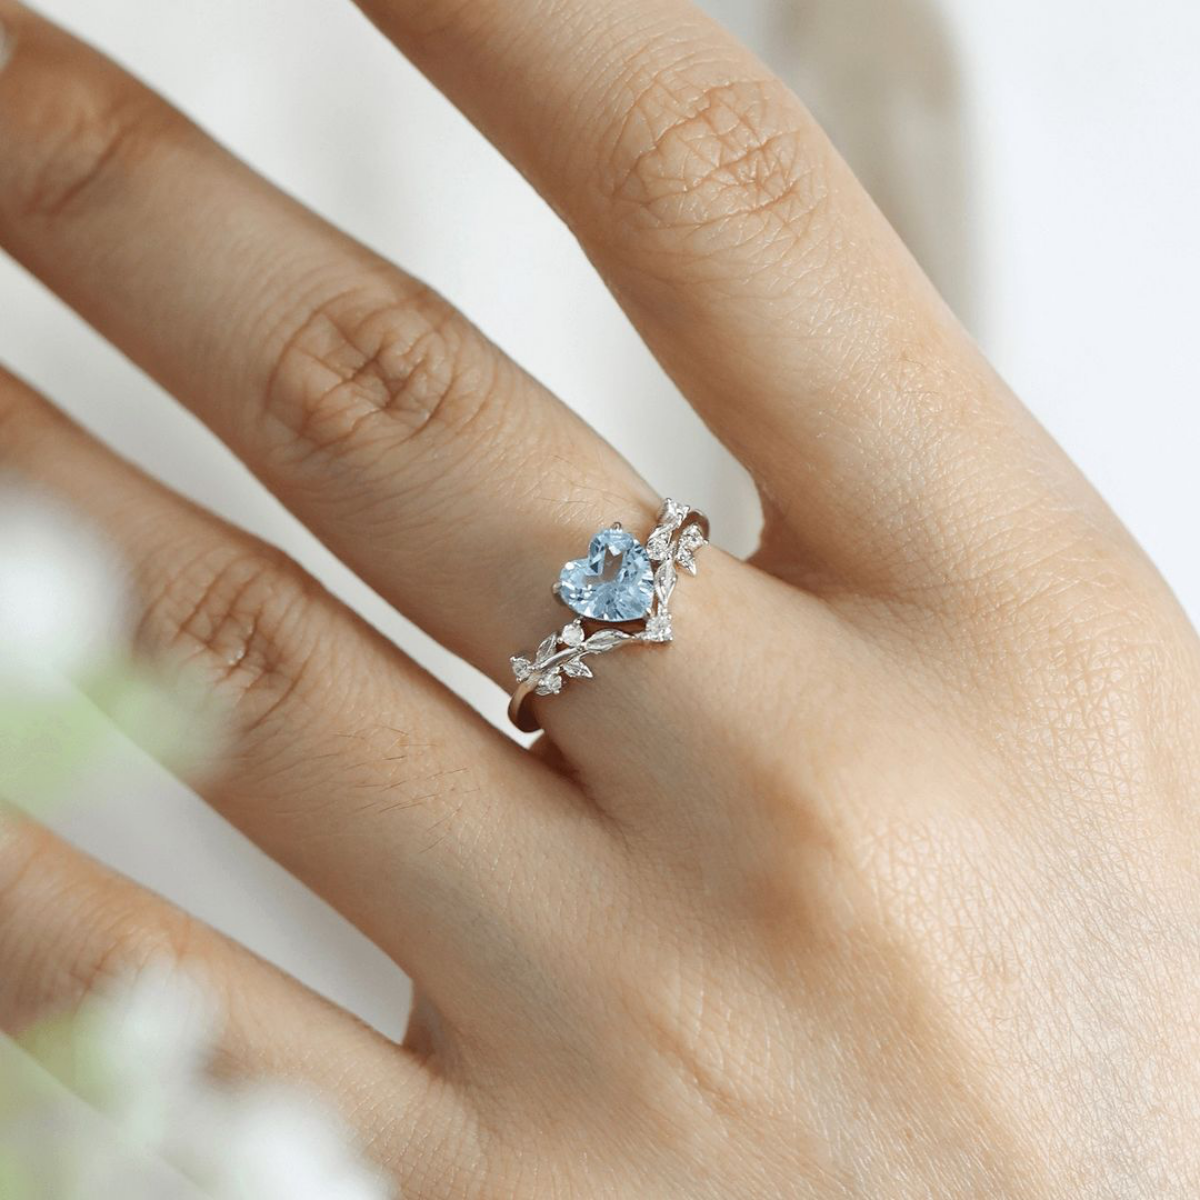 Everything You Need To Know About Promise Rings